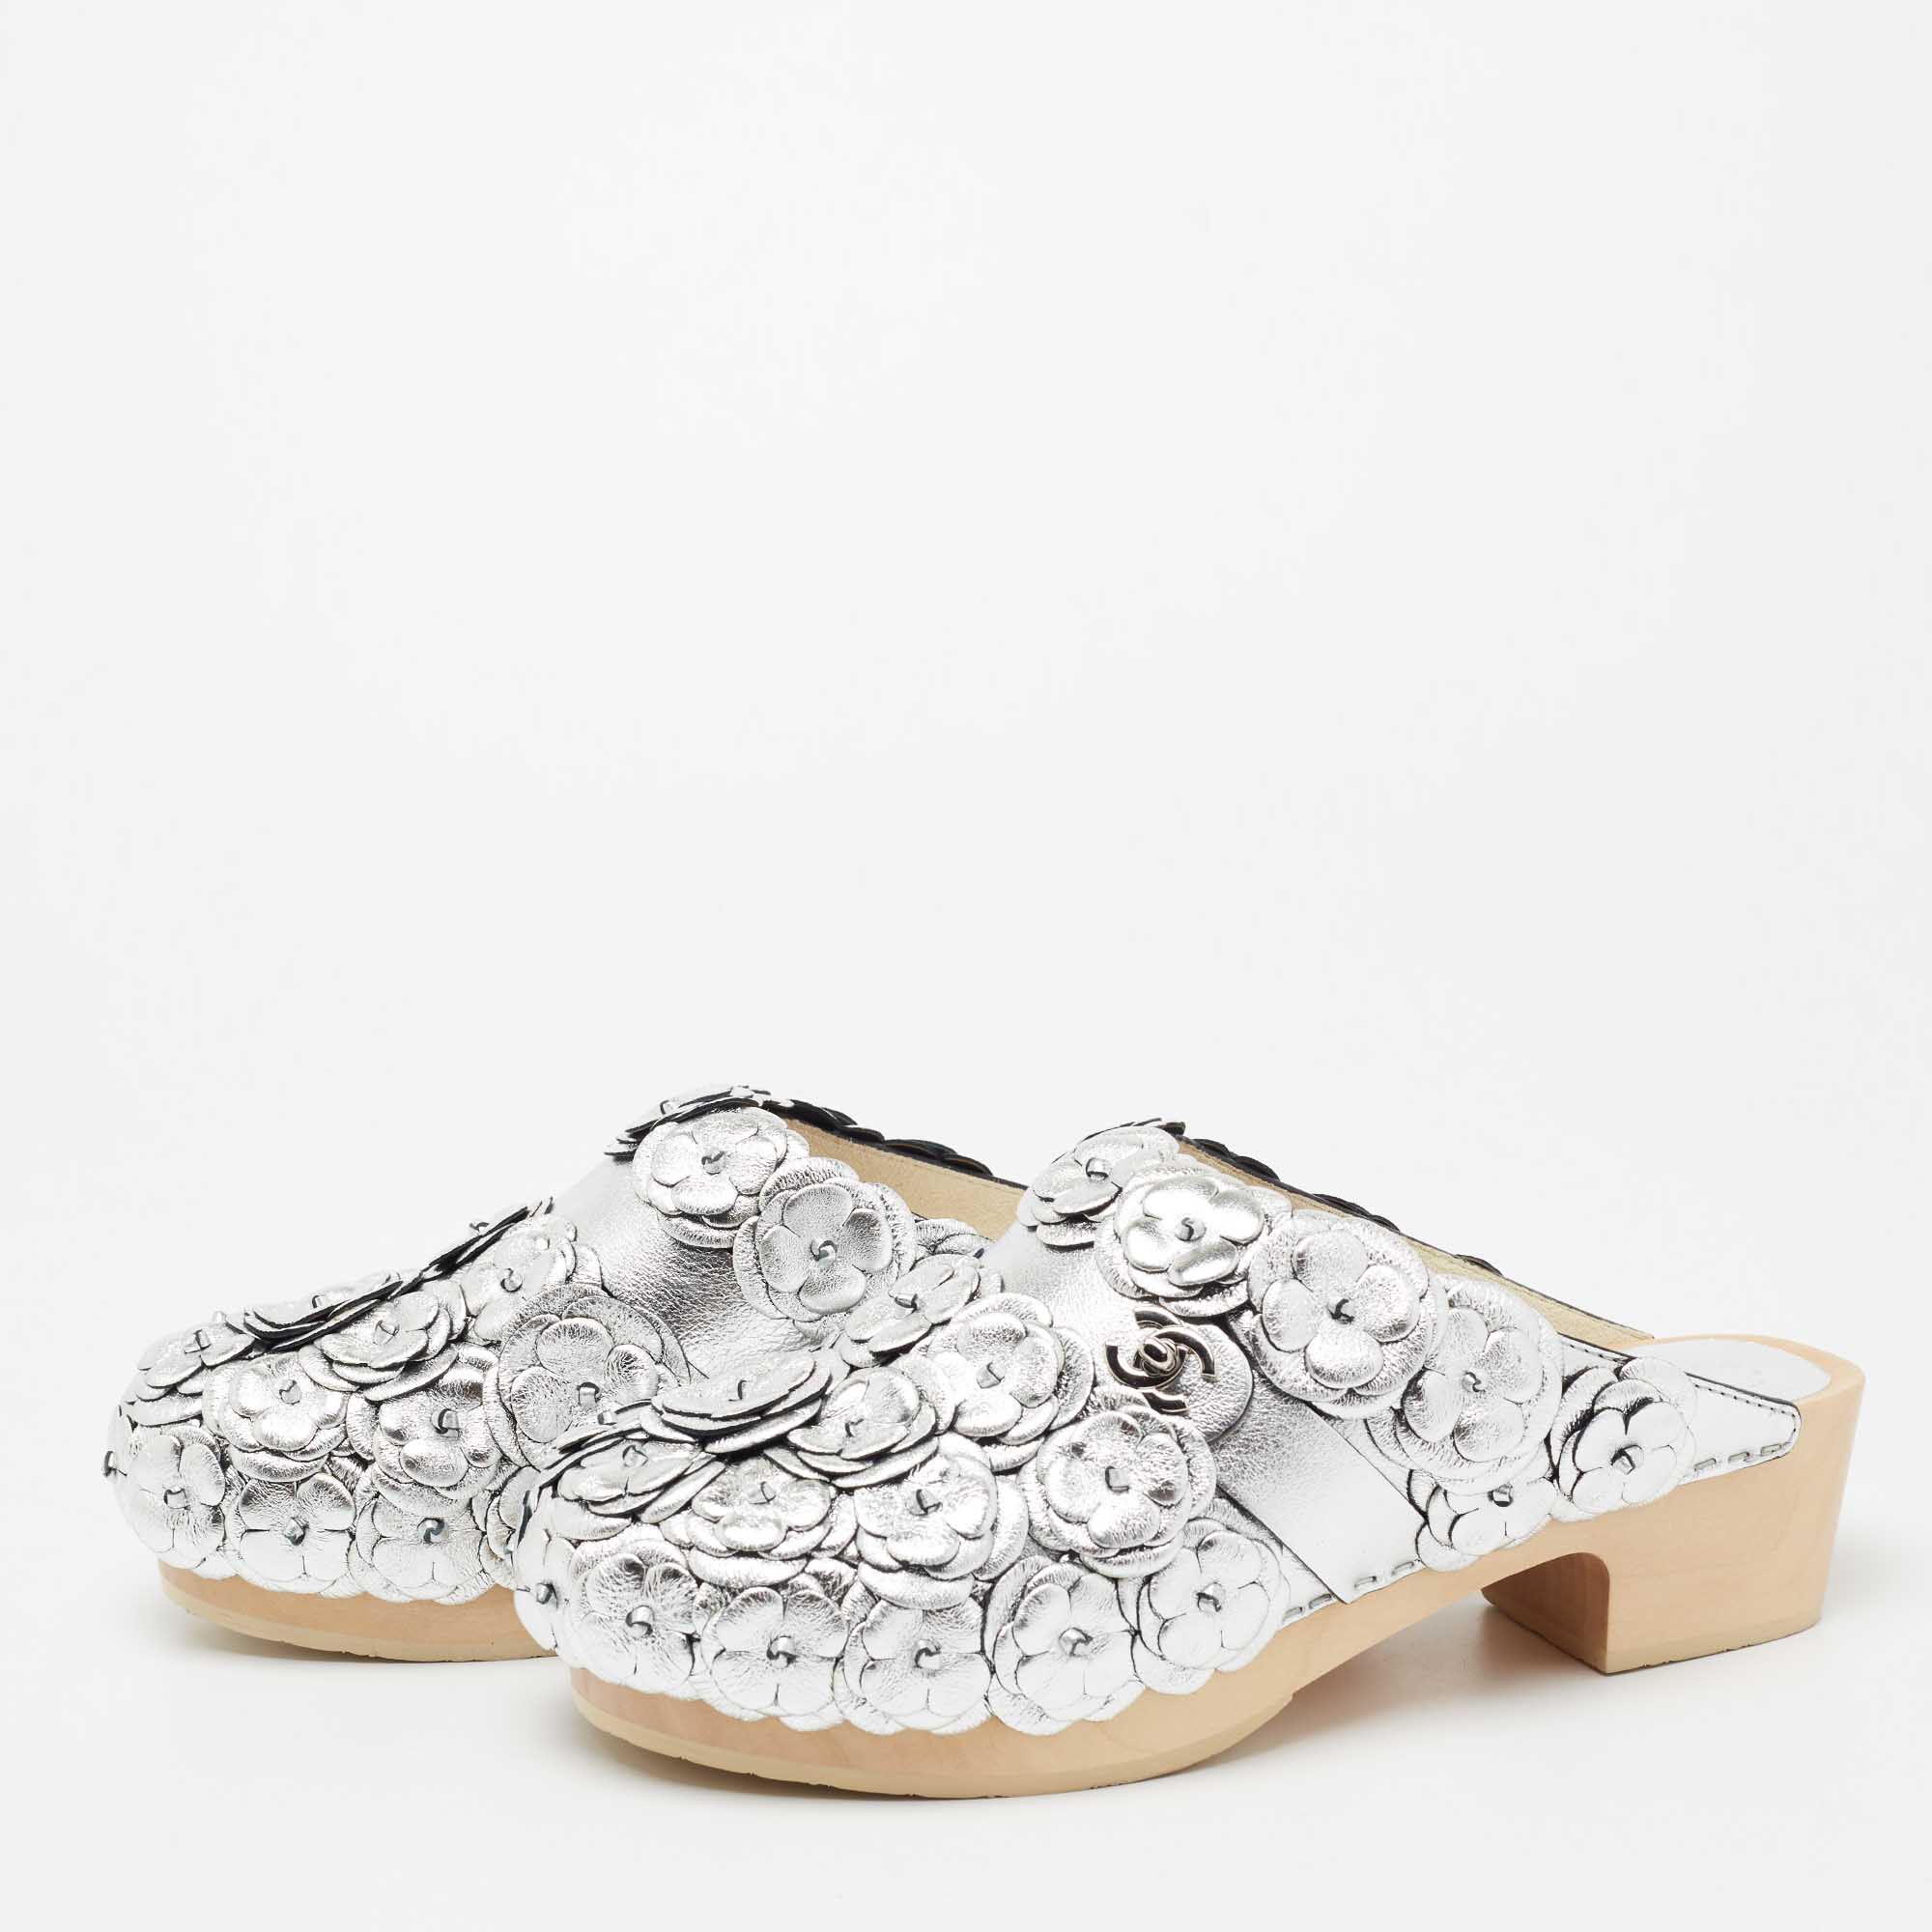 

Chanel Metallic Silver Camellia Embellished CC Lock Wooden Clogs Size